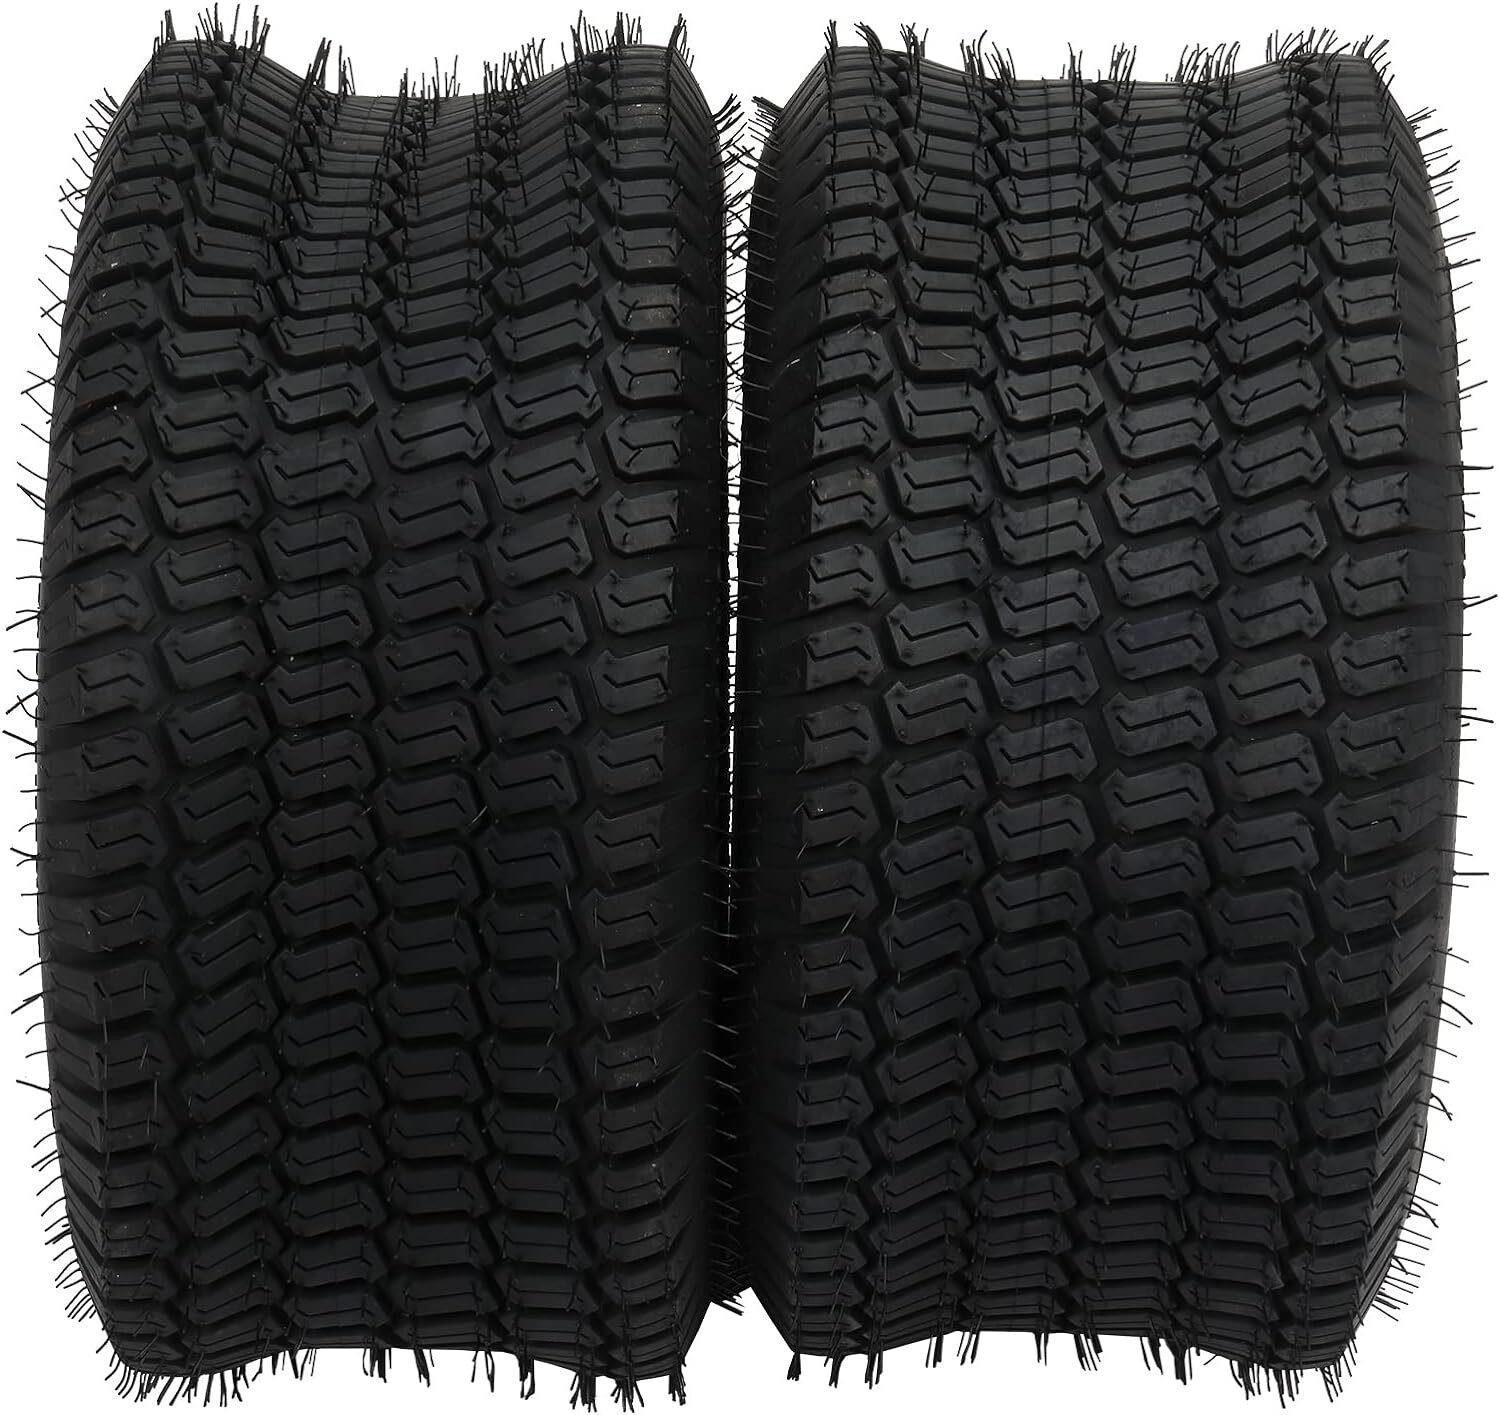 Set of 2 22x9.50-10 Lawn Mower Tractor Tires